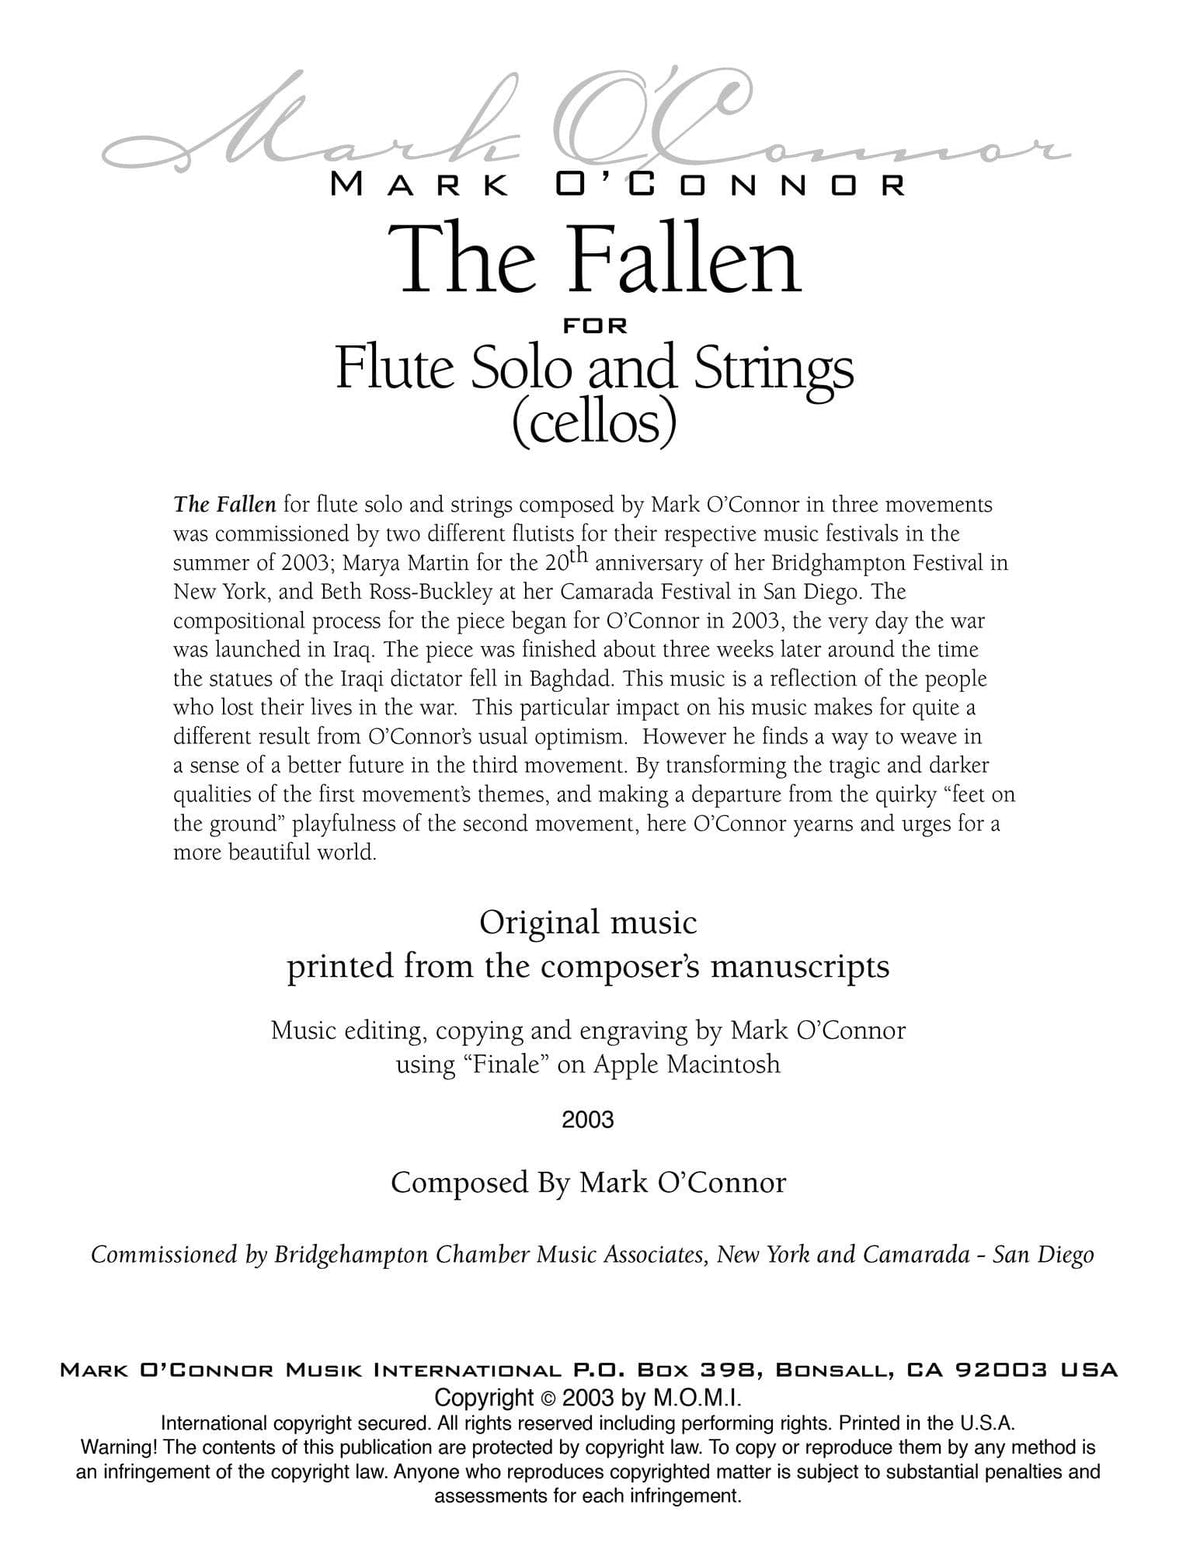 O'Connor, Mark - The Fallen for Flute and Strings - Cellos - Digital Download